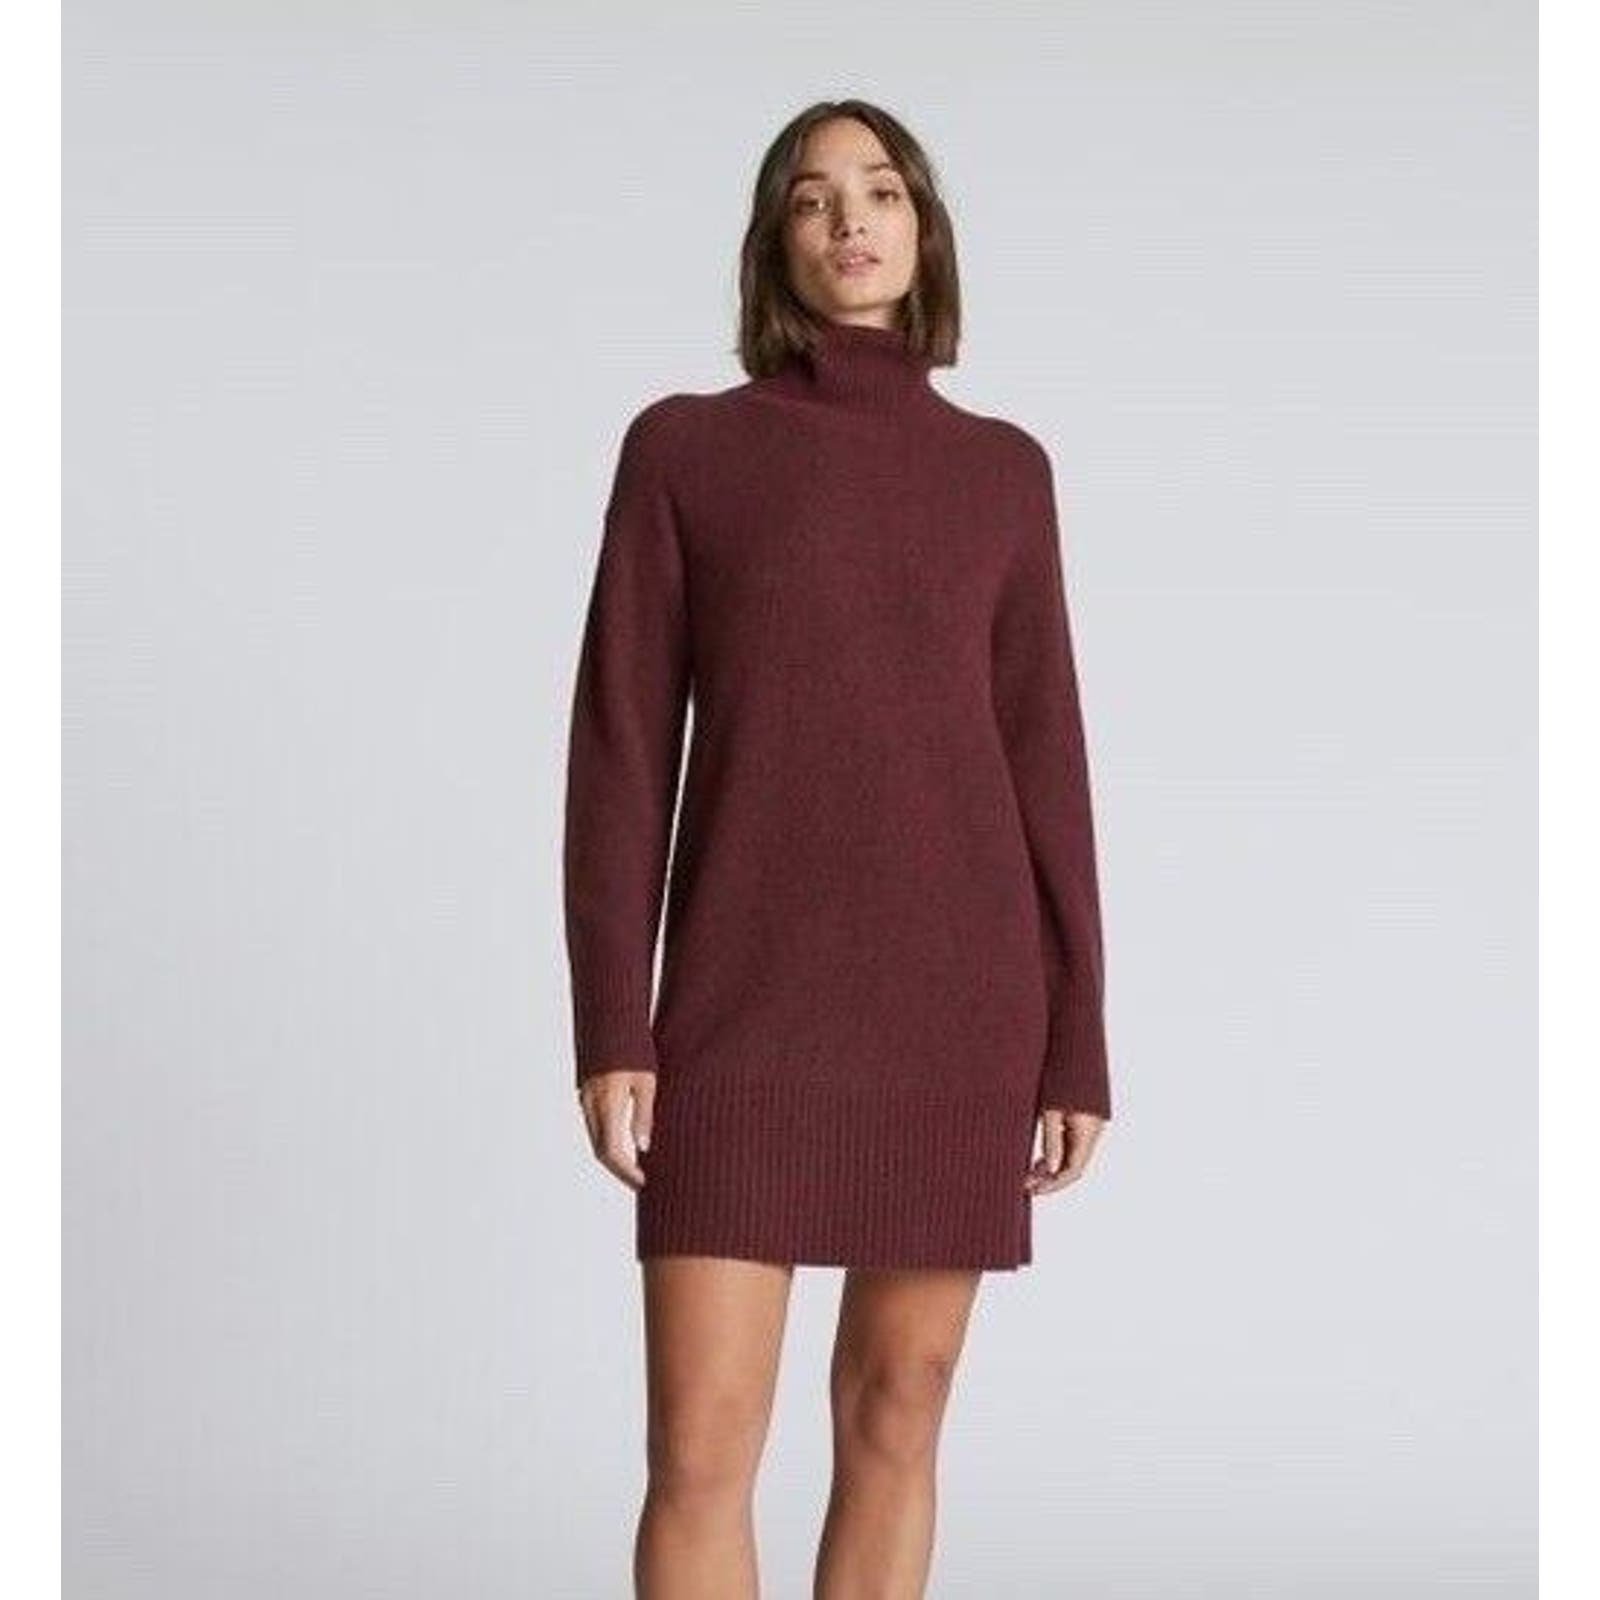 Buy Everlane The Cozy Stretch Turtleneck Sweater Wool Blend Dress Size Large NLXIvZKFa Hot Sale